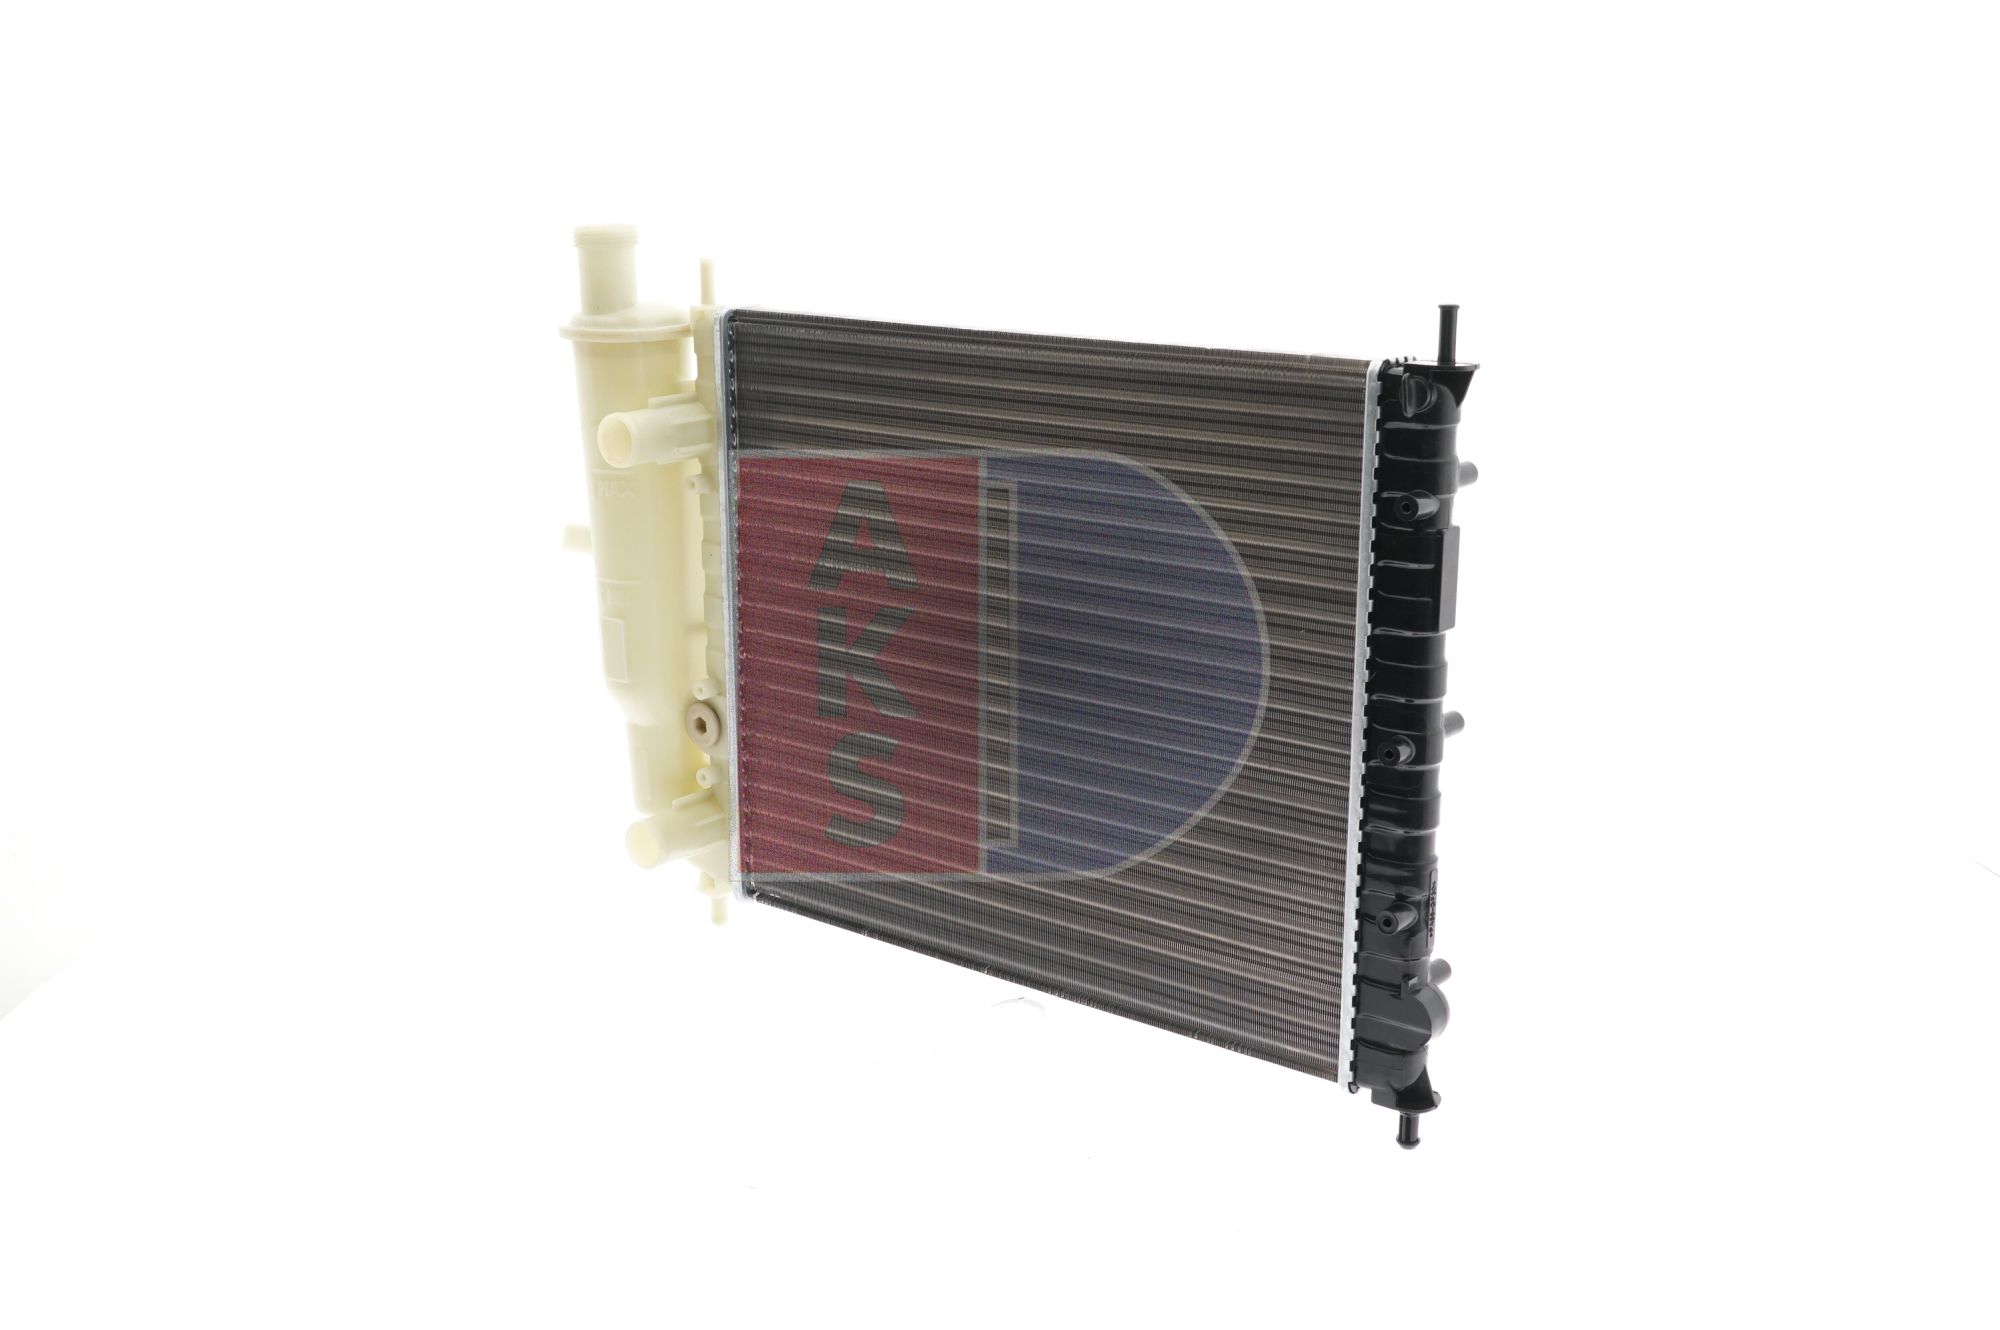 AKS DASIS 080580N Engine radiator Aluminium, for vehicles without air conditioning, 480 x 415 x 23 mm, Manual Transmission, Mechanically jointed cooling fins